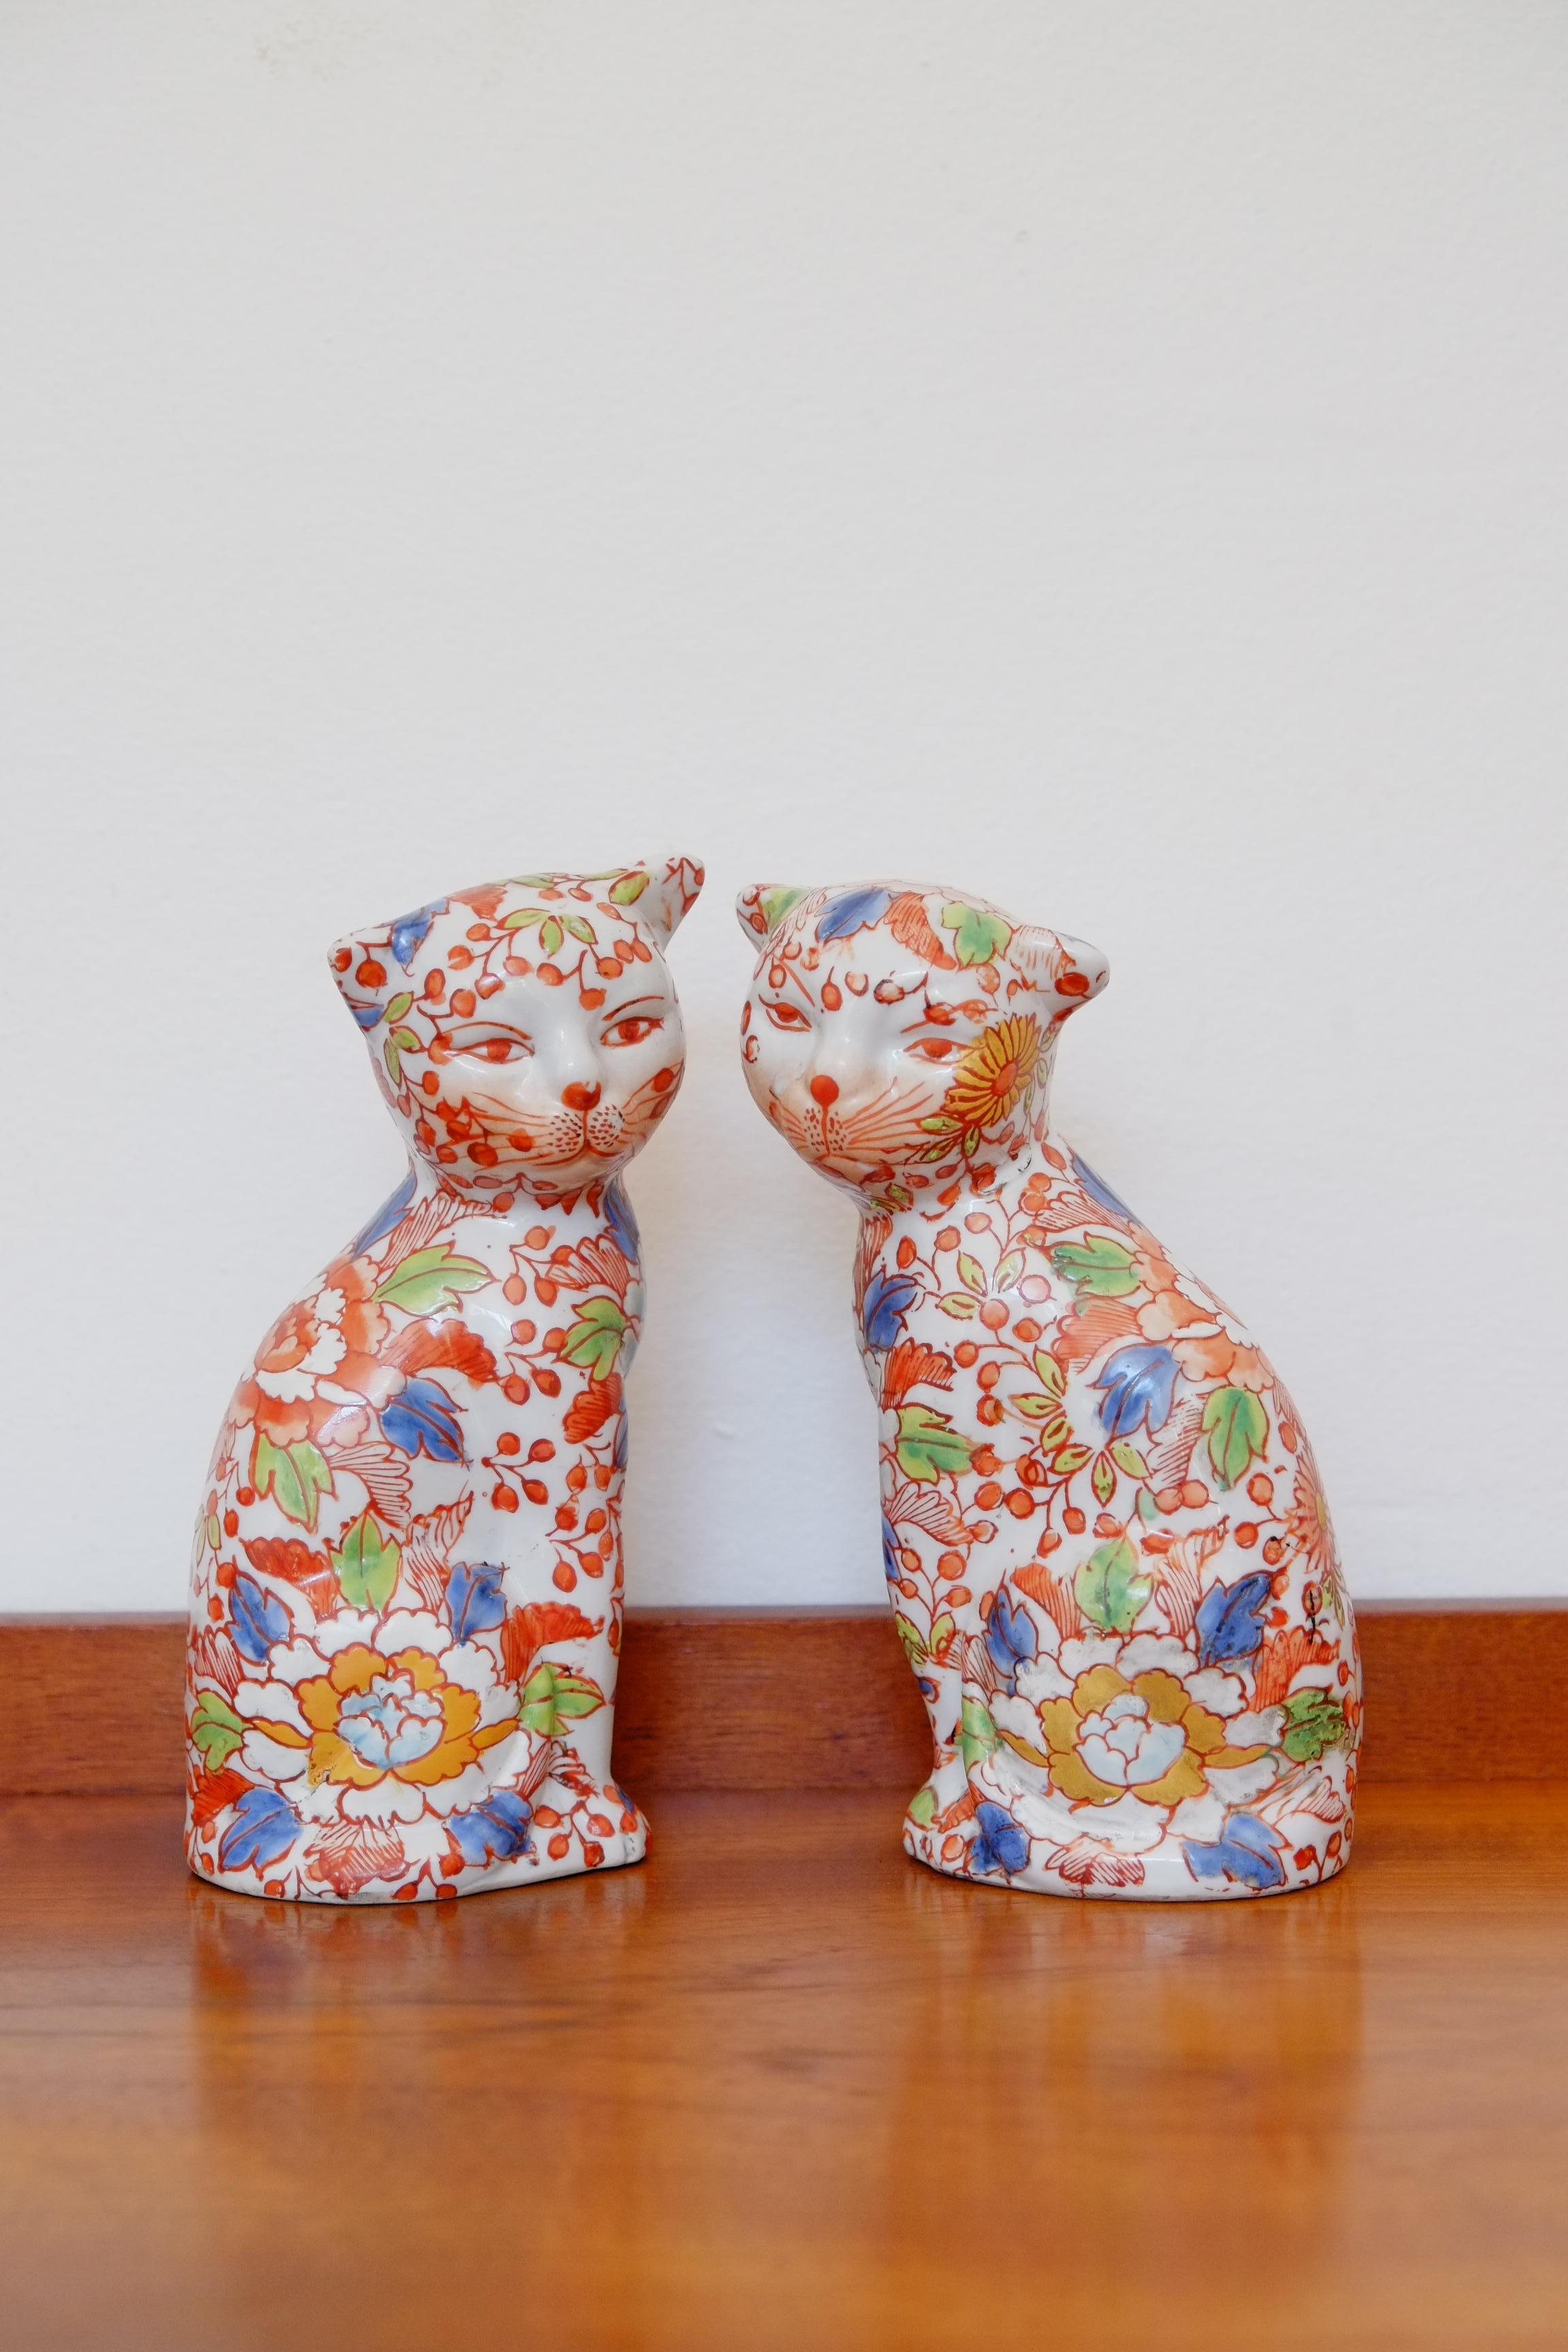 A beautiful pair of Imari porcelain cats. Originating in Japan and dated to the 1920's. 

This pair of cats have such a lovely character, with slight differences from the handprinted enamel finish. They have slightly different sizes, beautiful